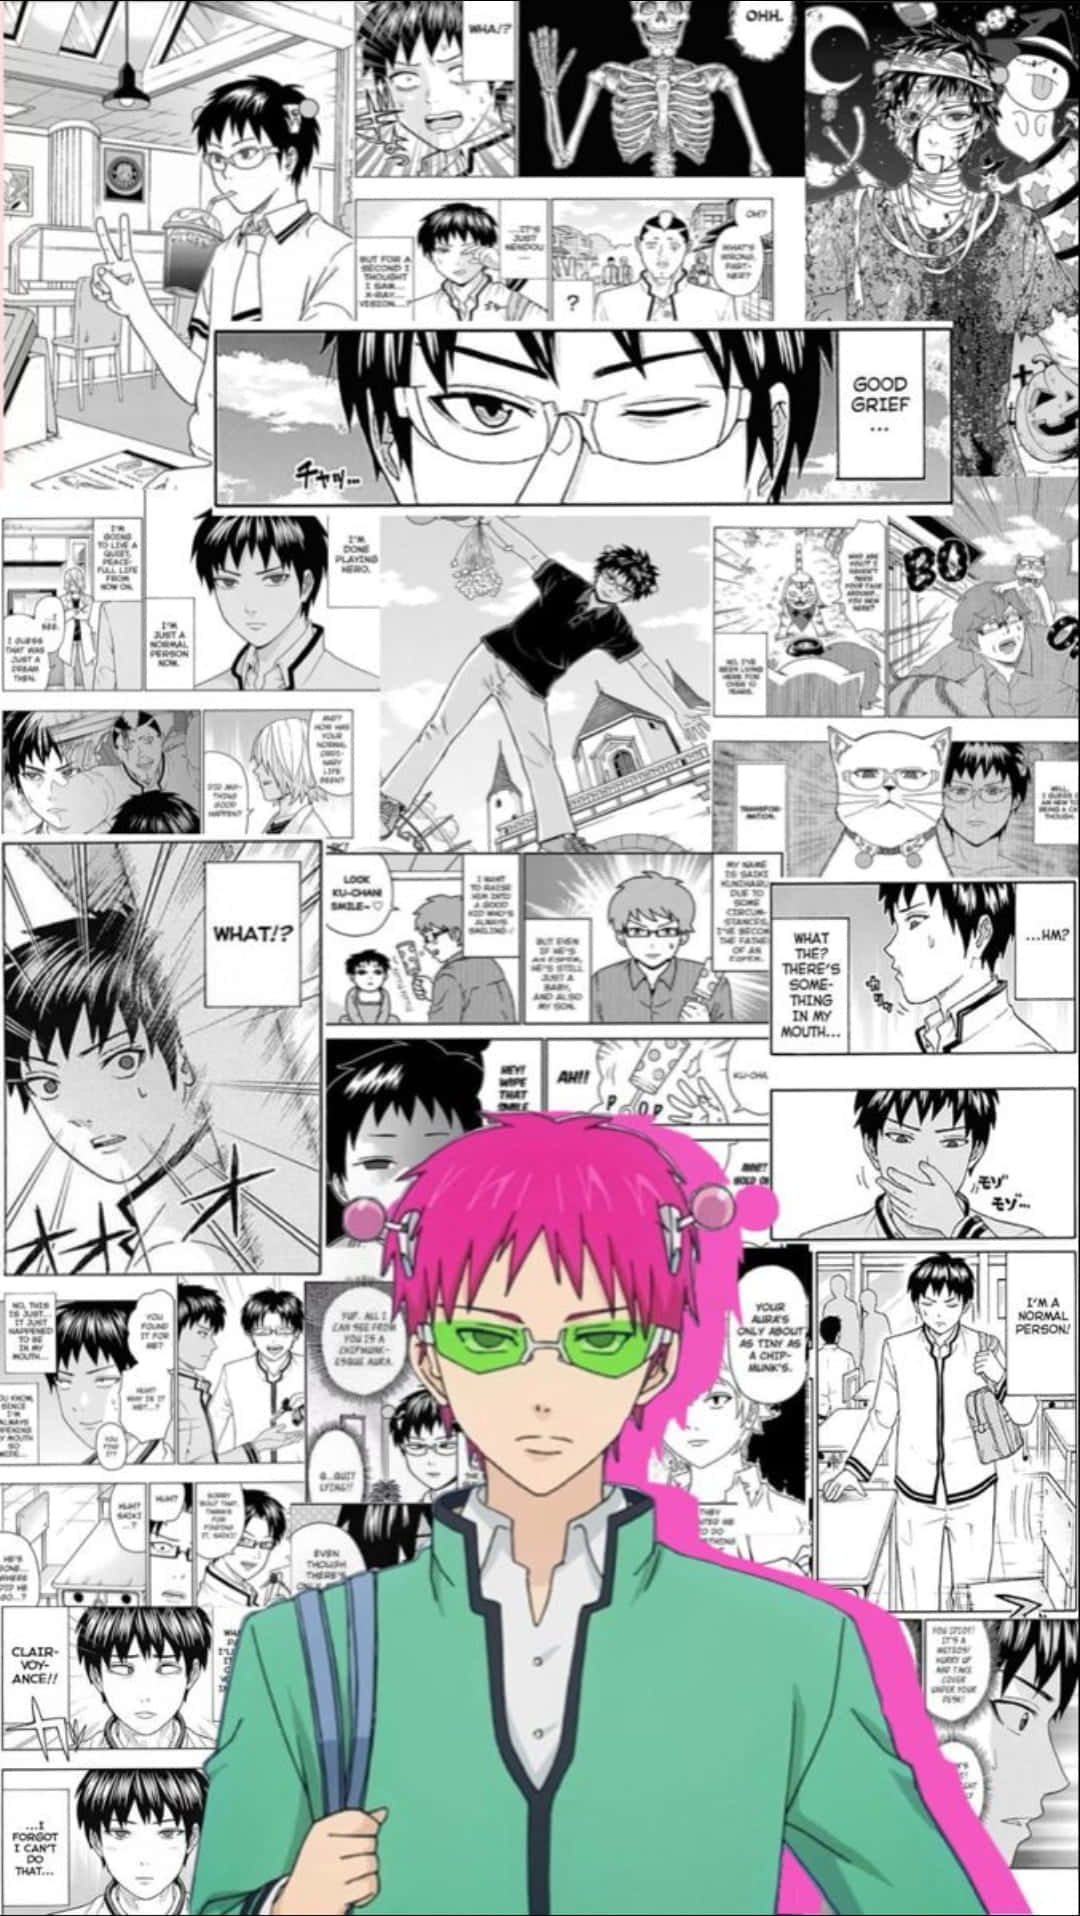 Follow Saiki&Friends As They Embark On Their Quirky Adventure Wallpaper